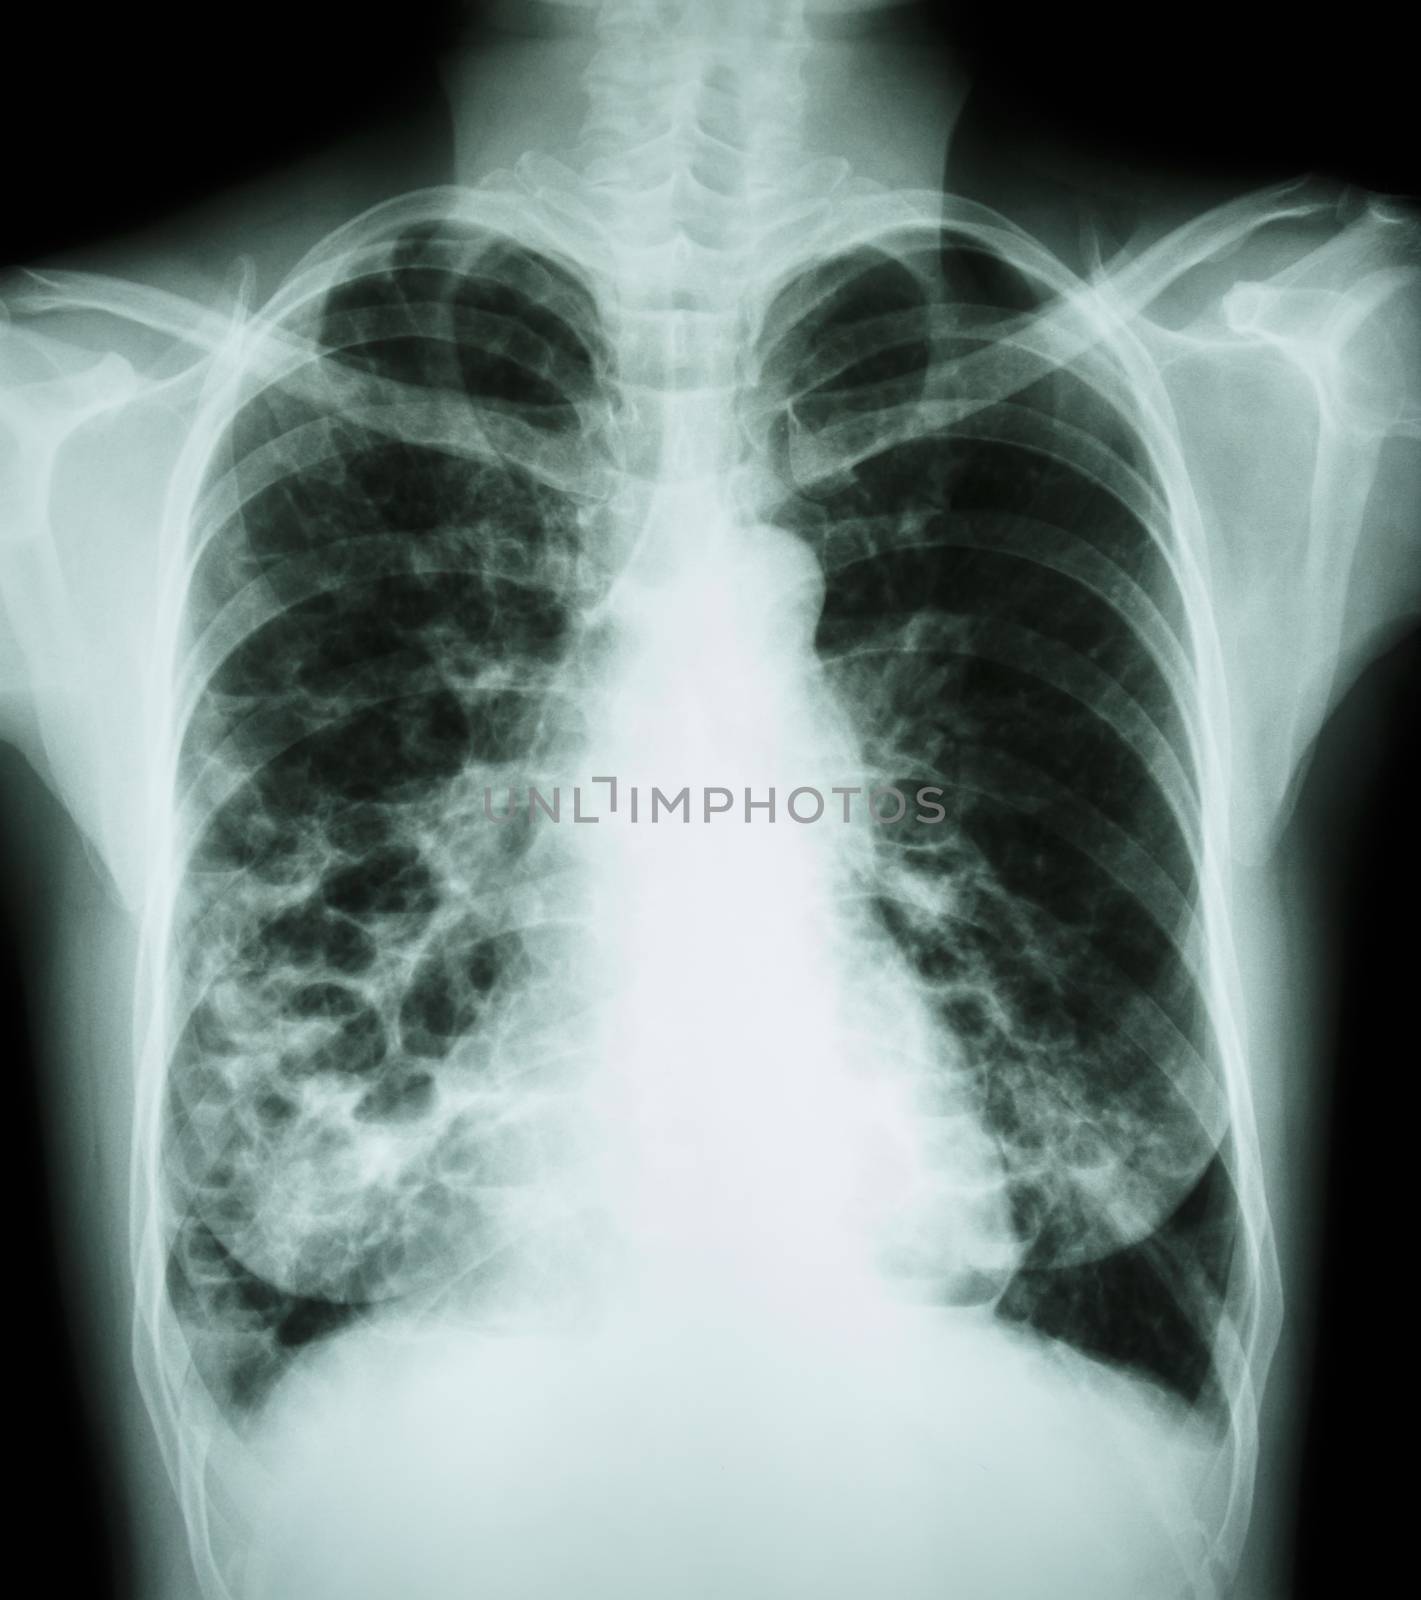 "Bronchiectasis" X-ray chest show : multiple lung bleb and cyst due to chronic infection